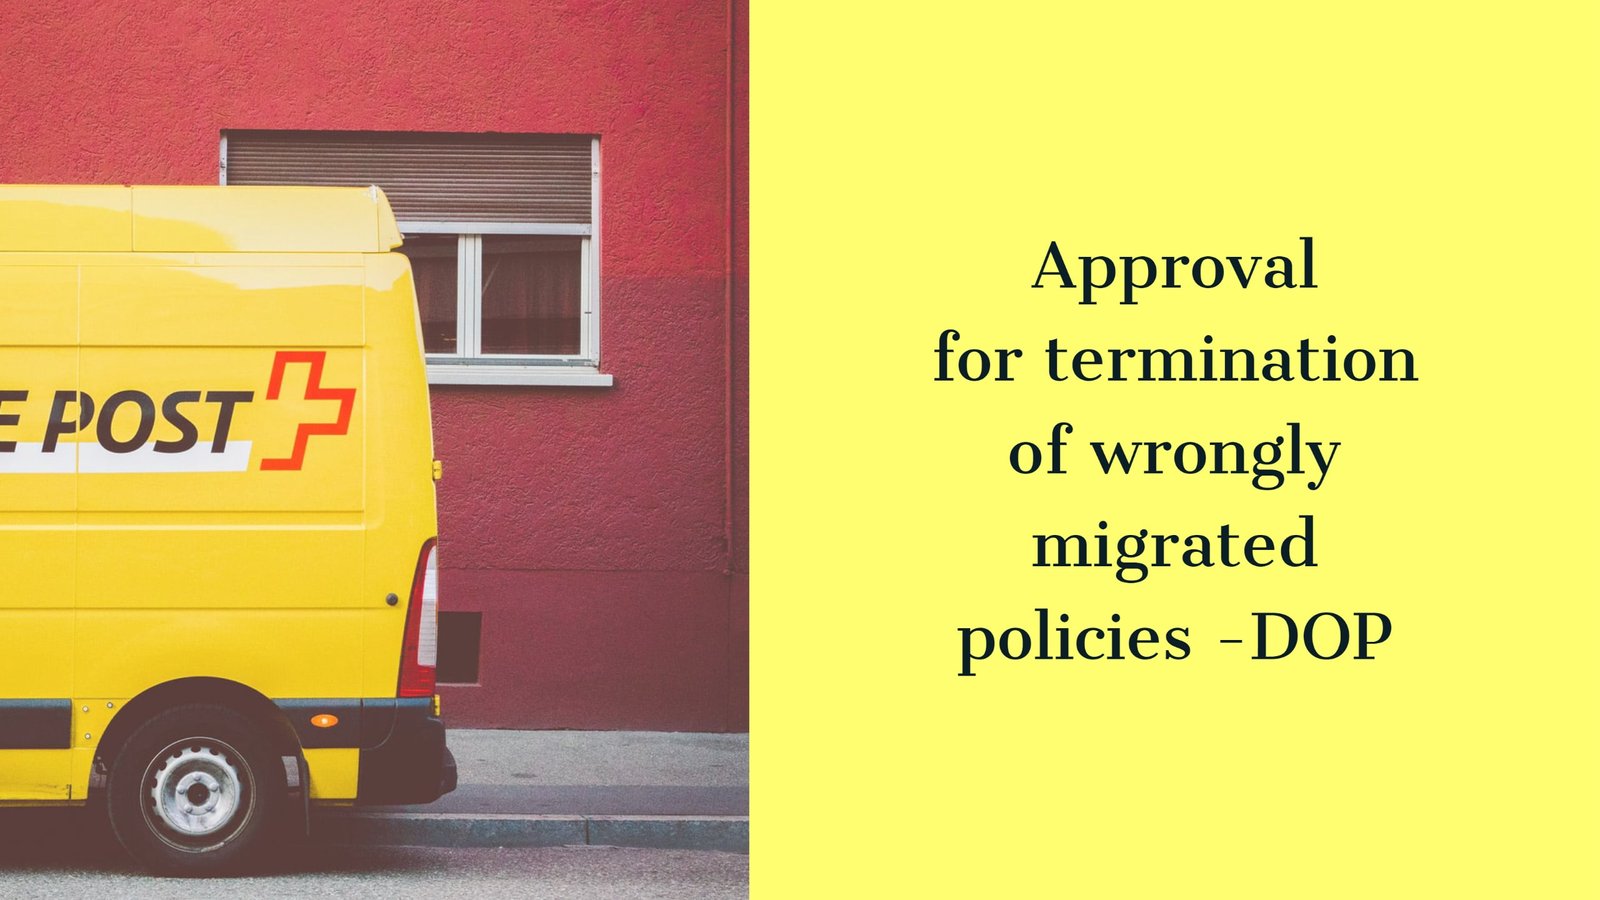 Approval for termination of wrongly migrated policies -DOP